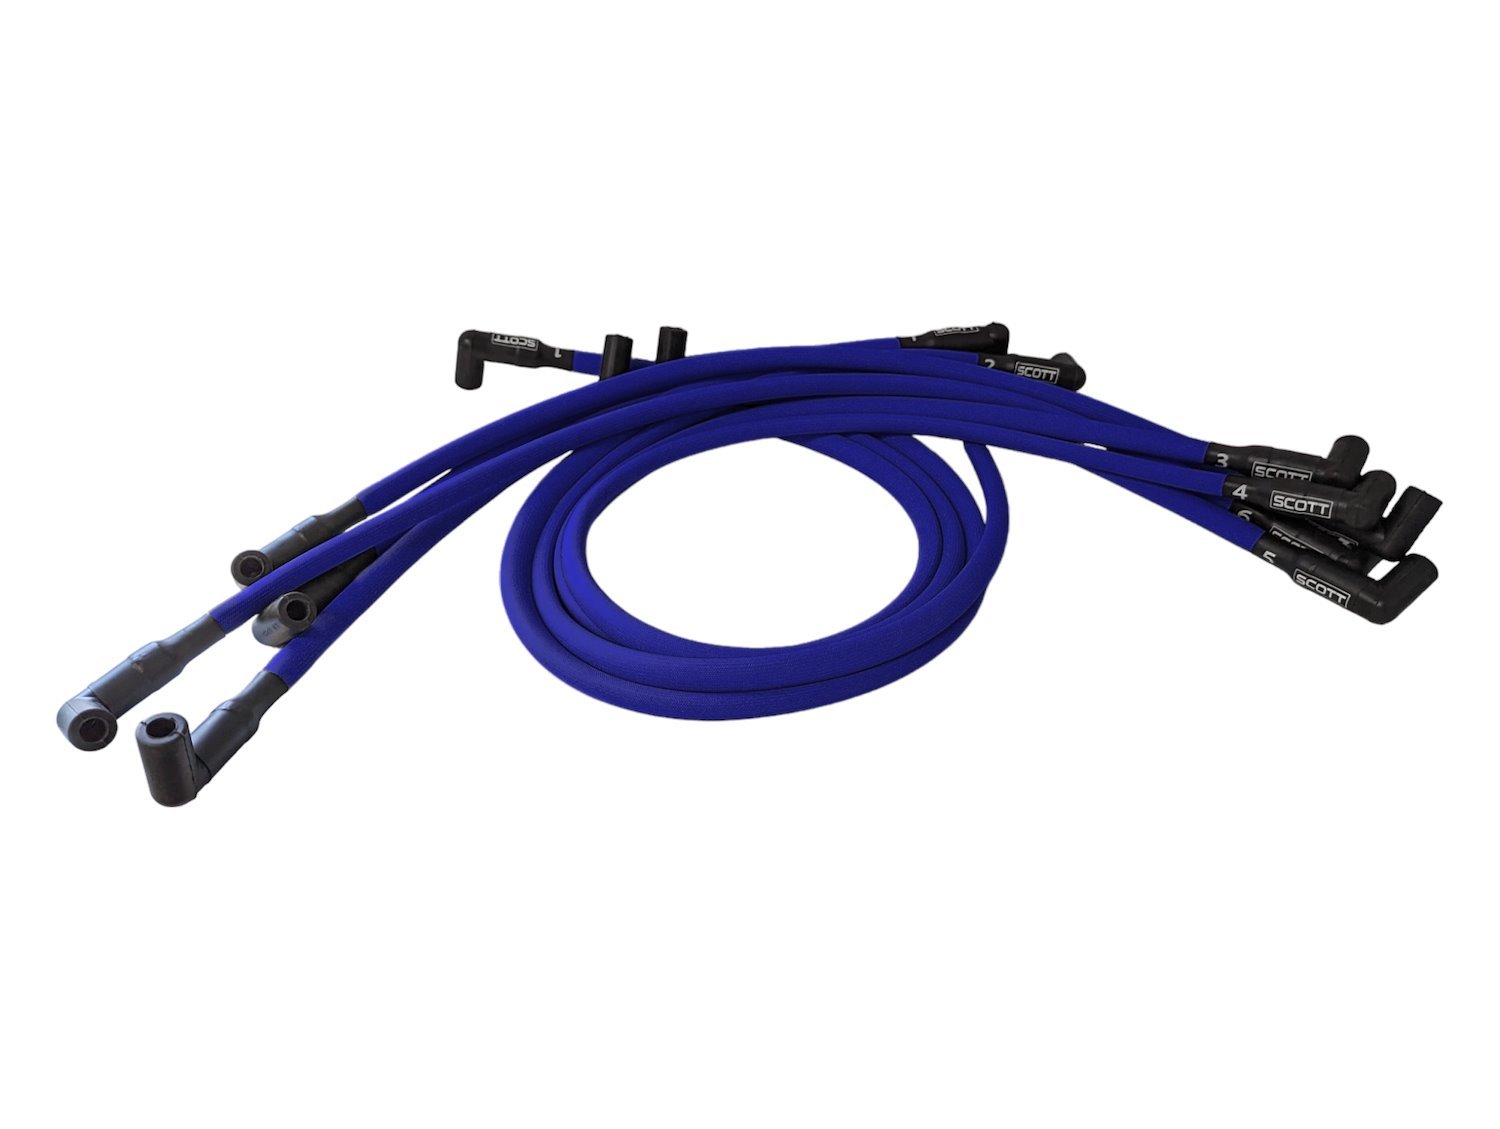 SPW-PS-407-3 High-Performance Fiberglass-Oversleeved Spark Plug Wire Set for Small Block Chevy, Under Header [Blue]